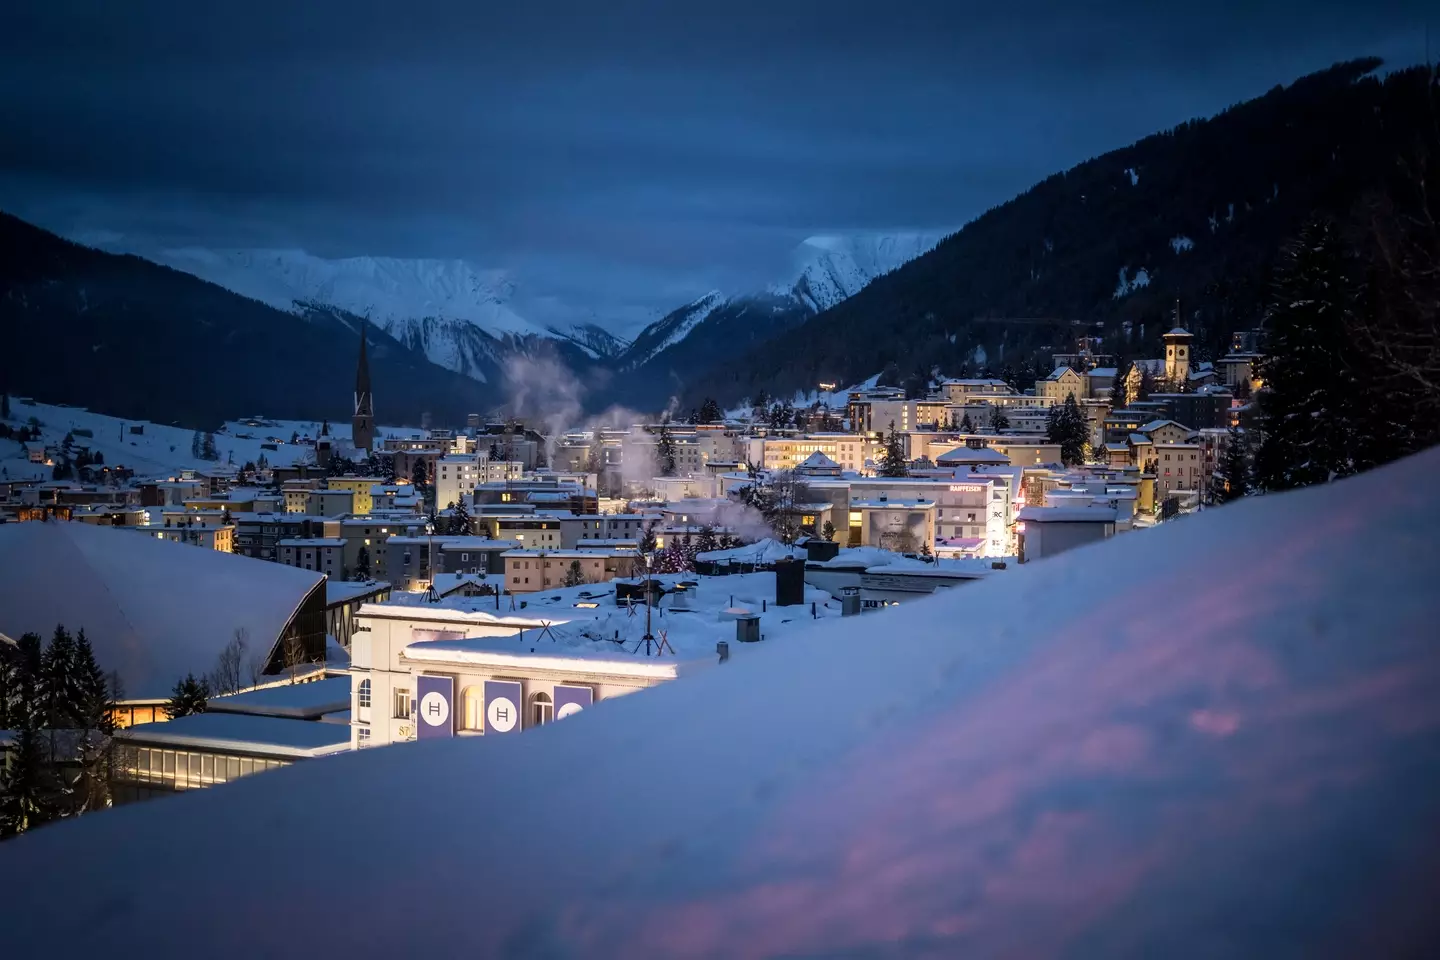 The World Economic Forum is kicking off in Davos.